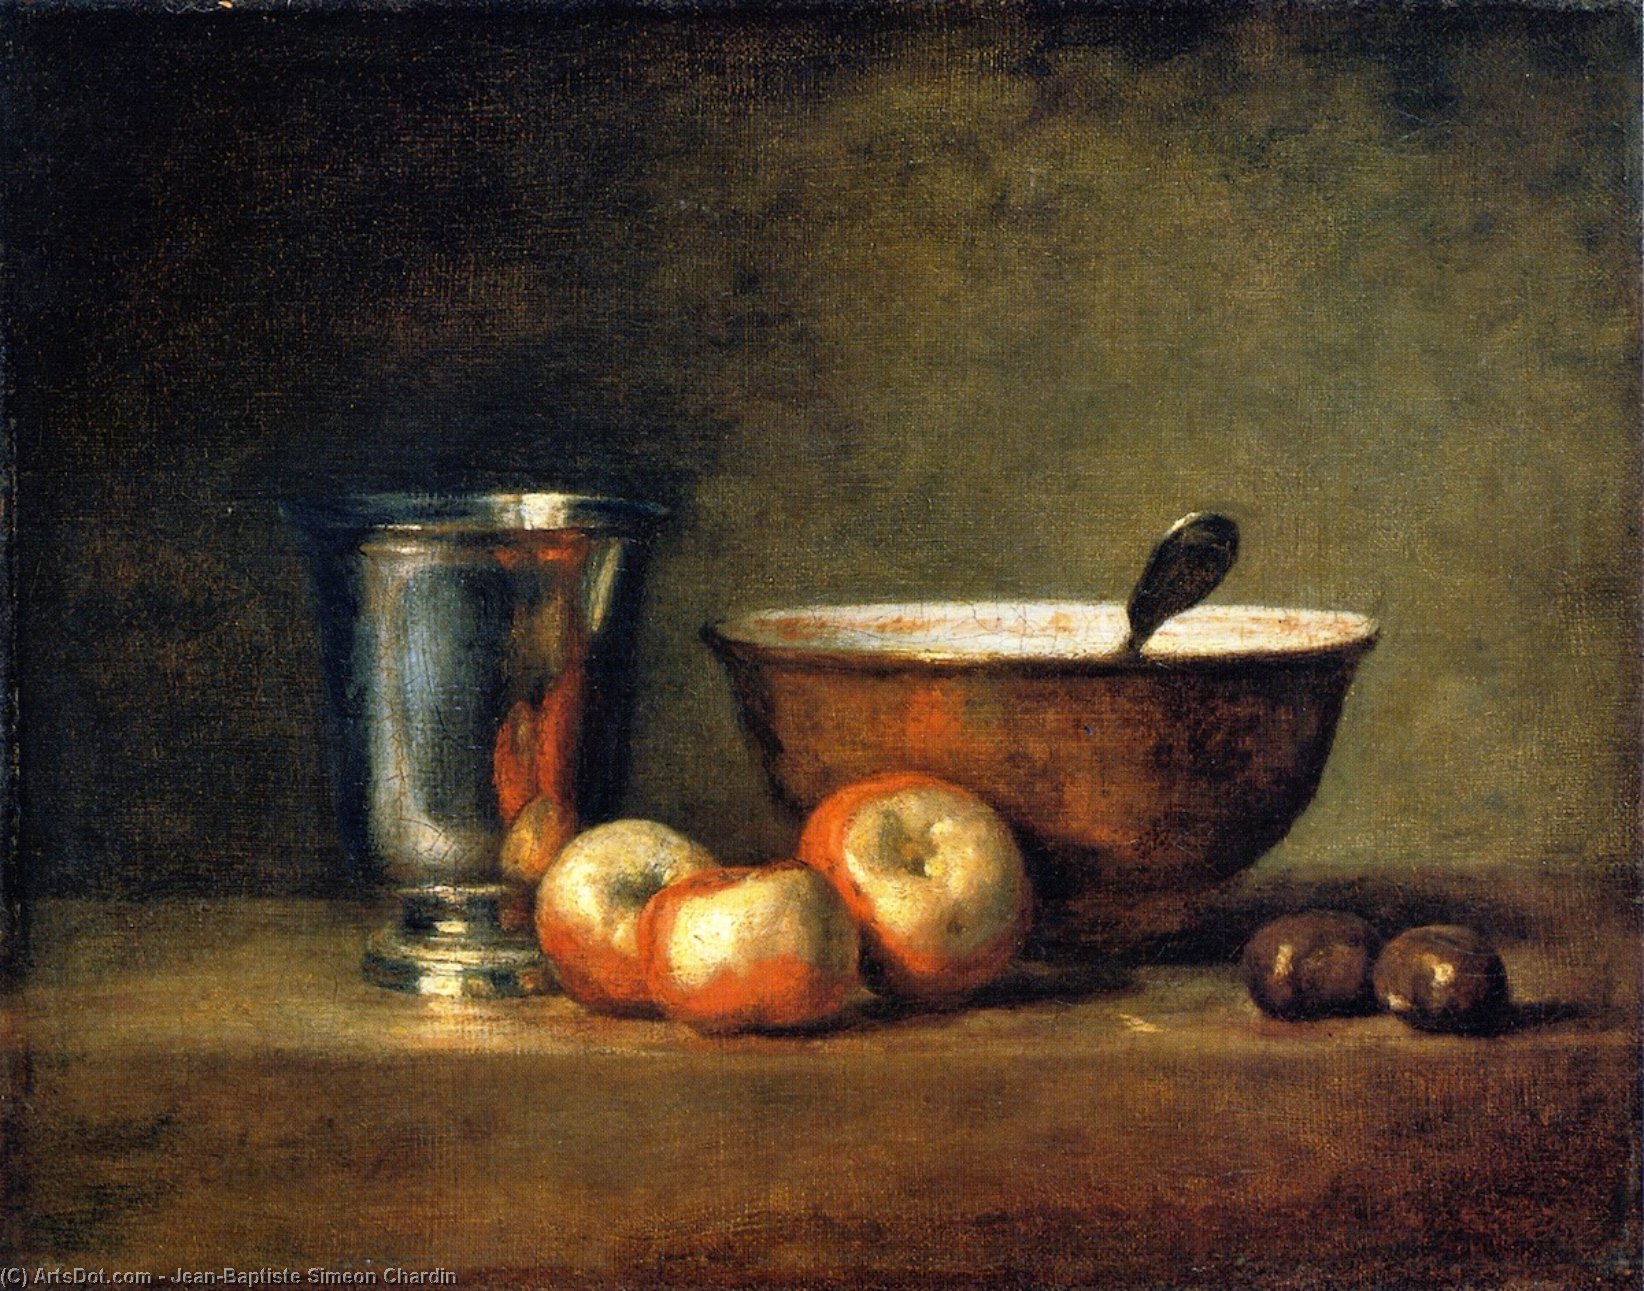 WikiOO.org - 백과 사전 - 회화, 삽화 Jean-Baptiste Simeon Chardin - Three Apples, Two Chestnuts, Bowl and Silver Goblet (also known as The Silver Goblet)